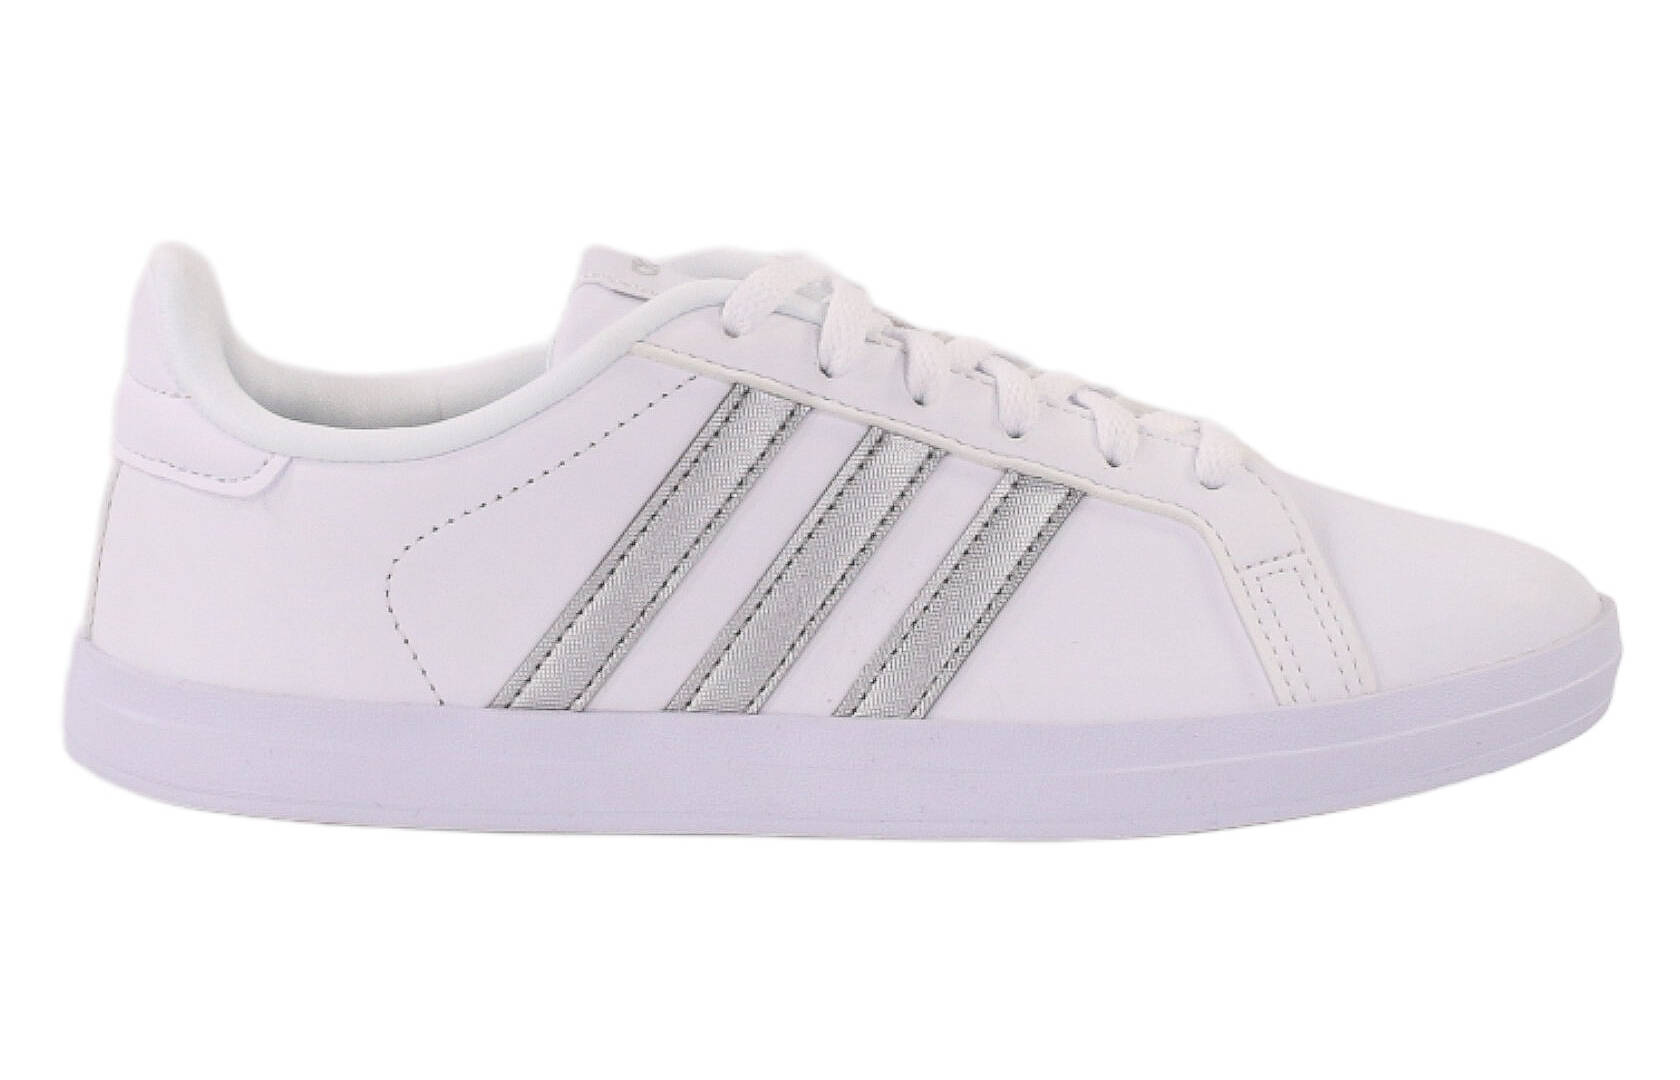 Adidas COURTPOINT FY8407 women's shoes